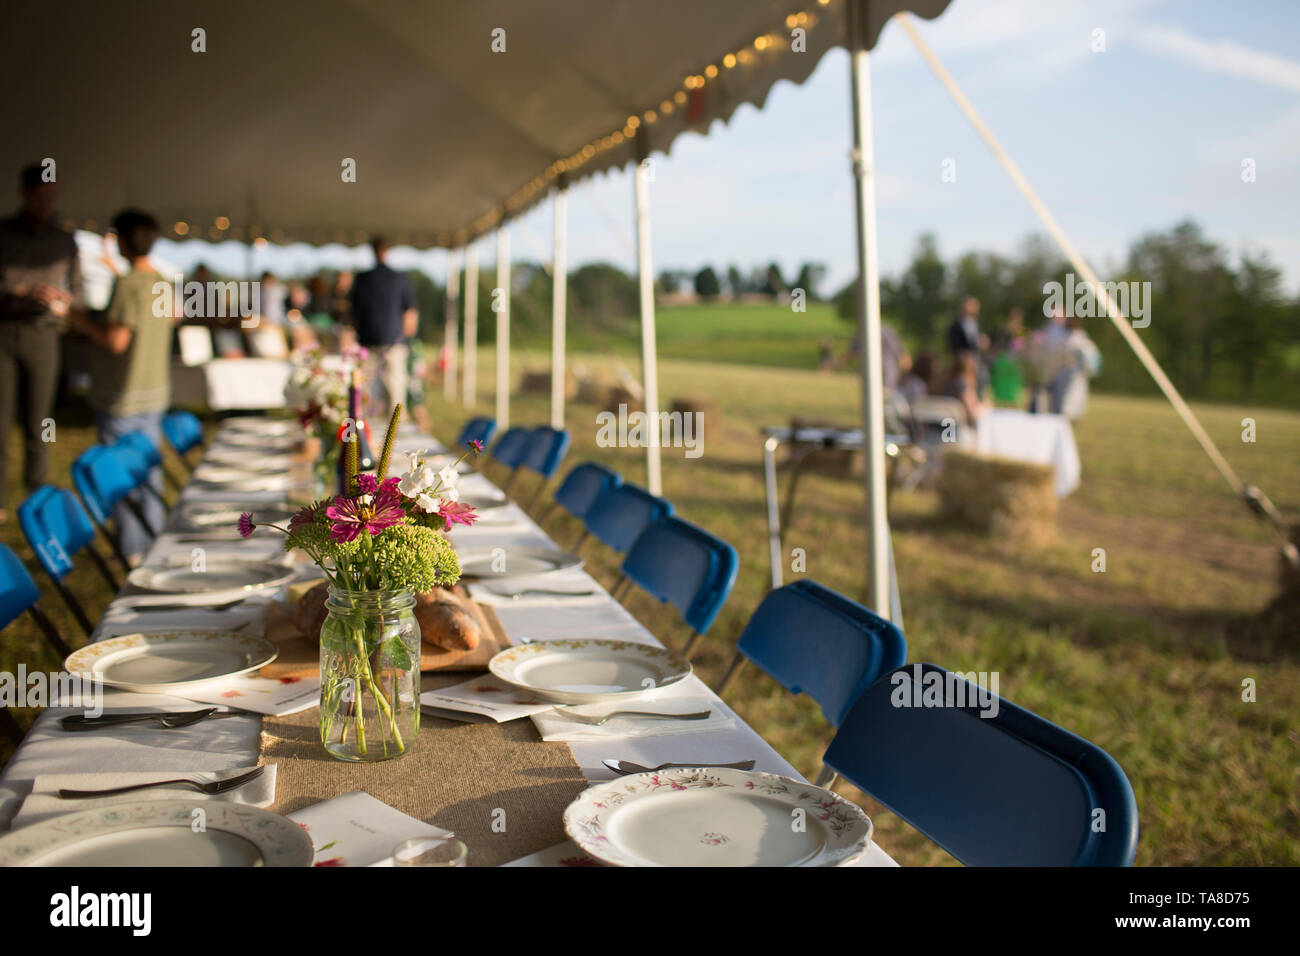 Group of People at Outdoor Dinner Party Under Large Tent with Tables set with Wine, Bread and Blue Chairs Stock Photo